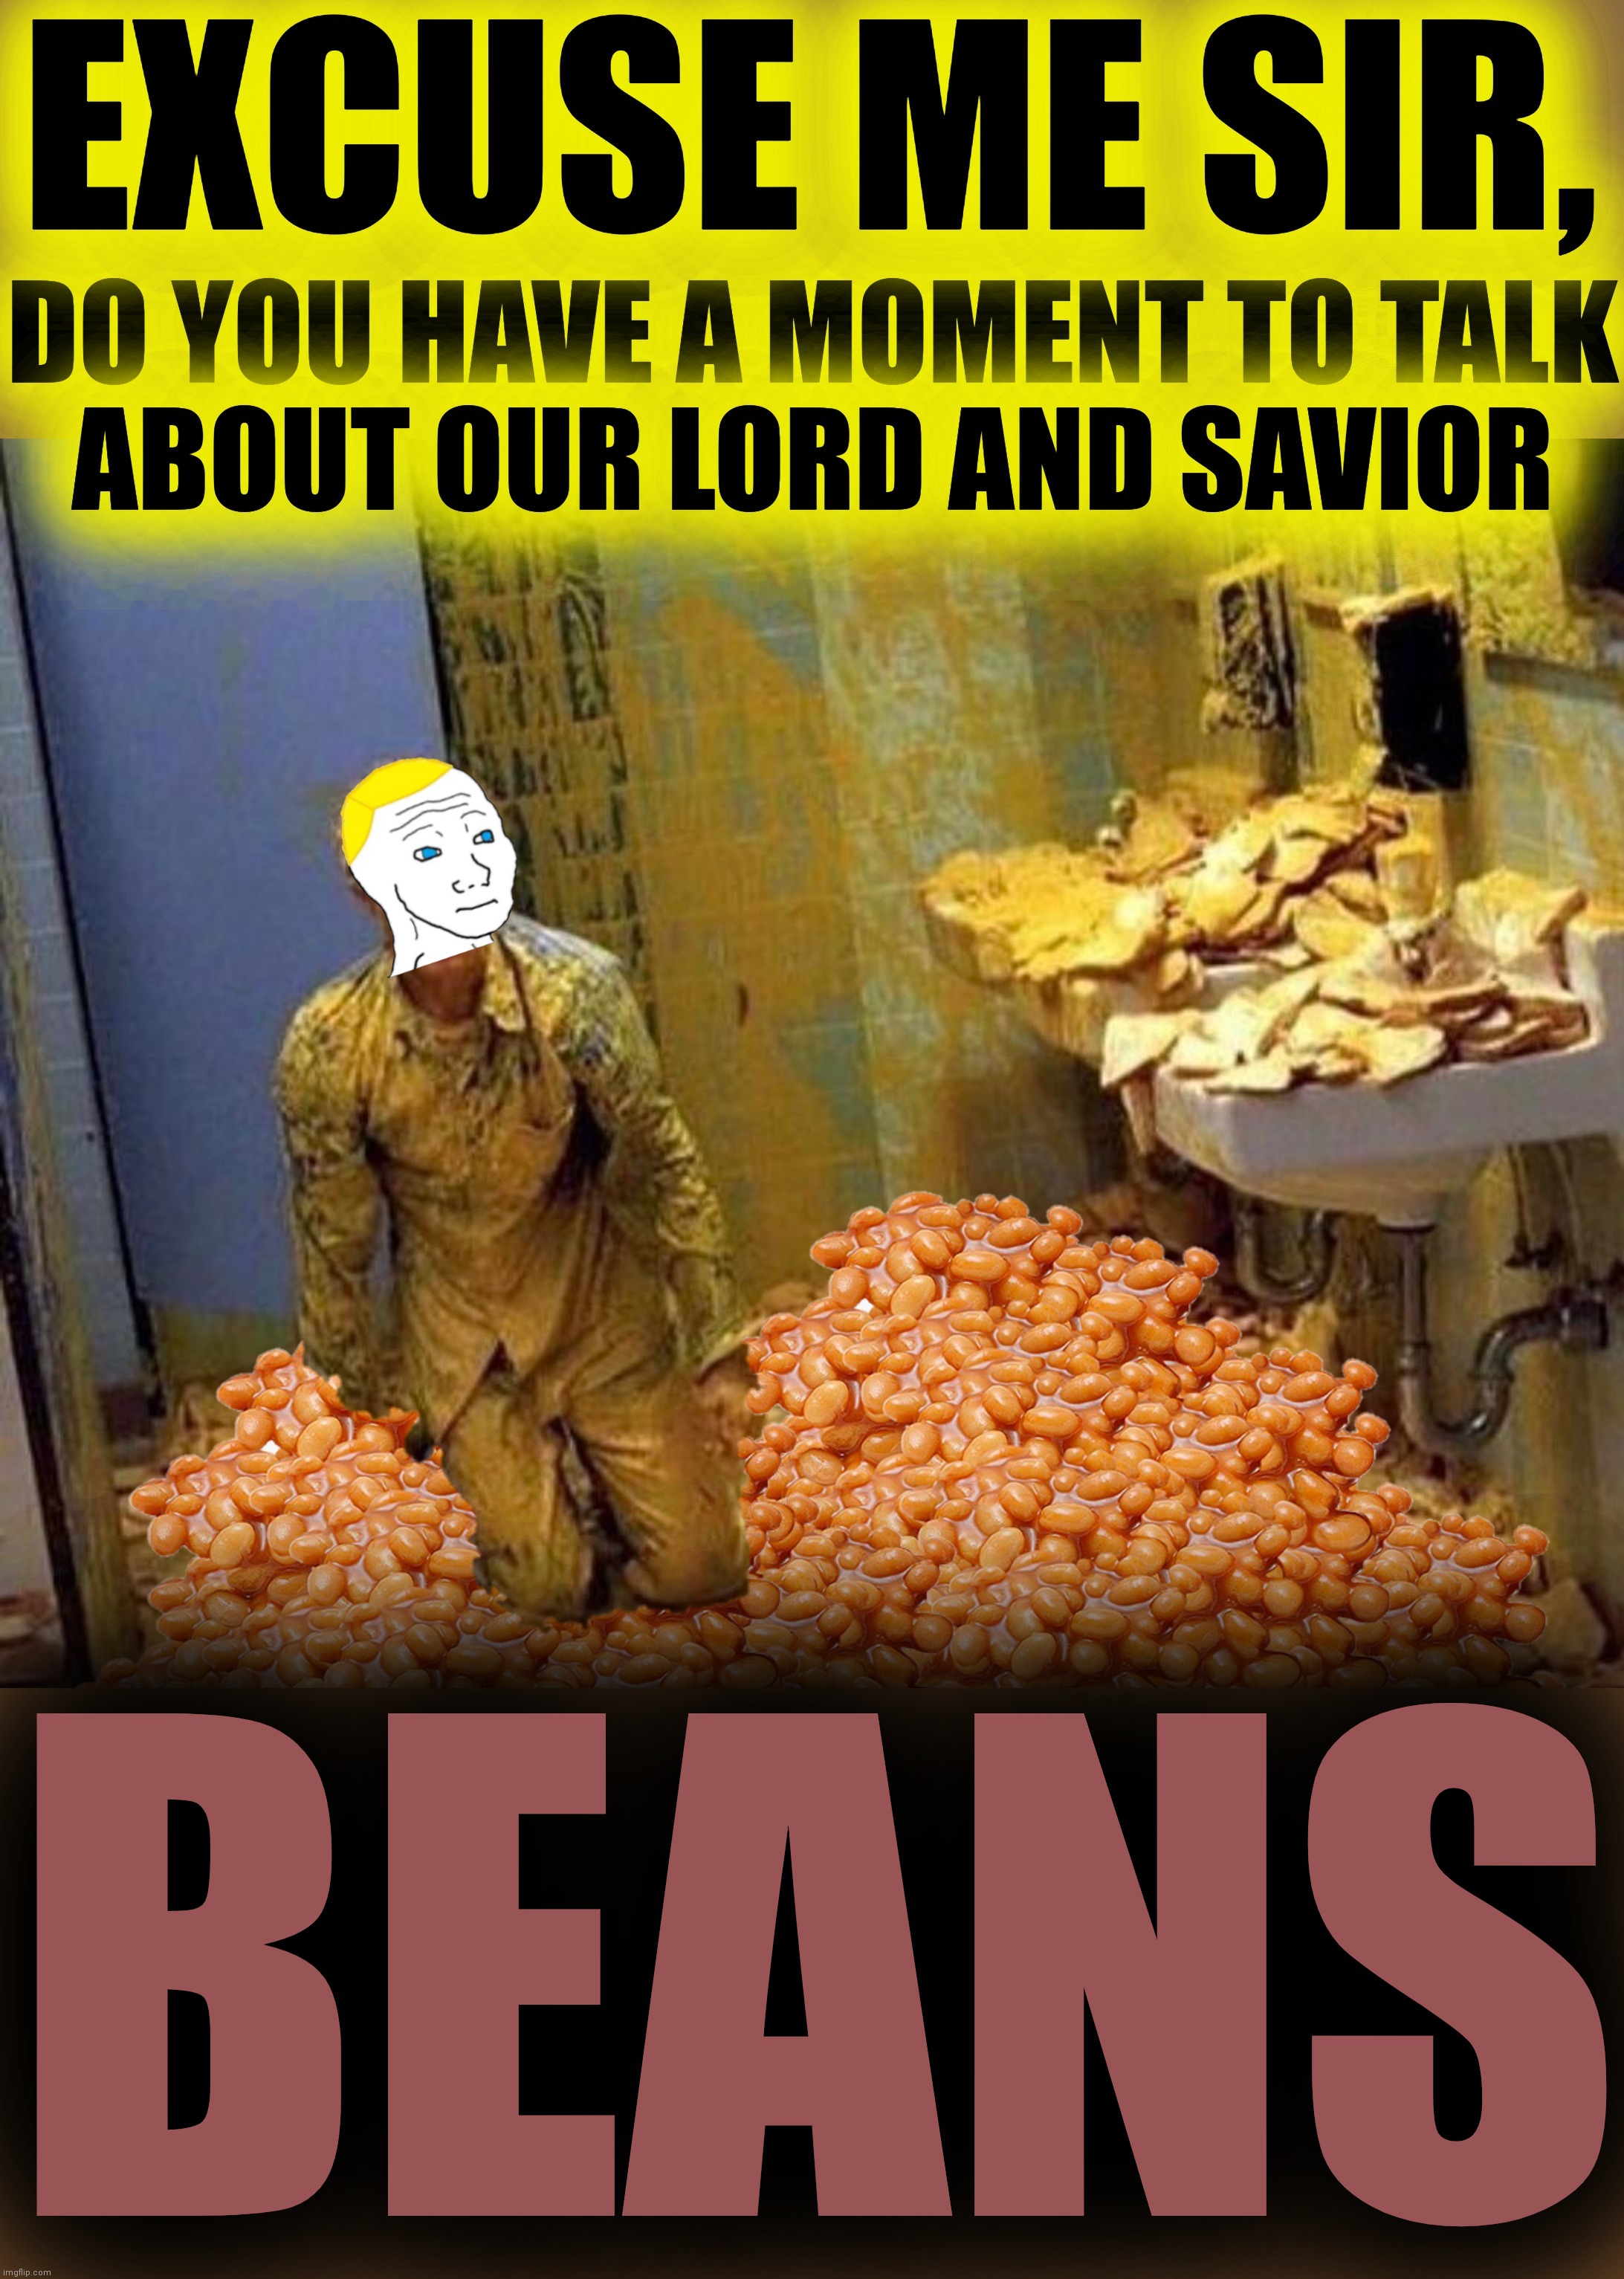 When you ask for mustard and get beans | BEANS | image tagged in richard chill,justice,beans,mustard,what the hell happened here,green meanie | made w/ Imgflip meme maker